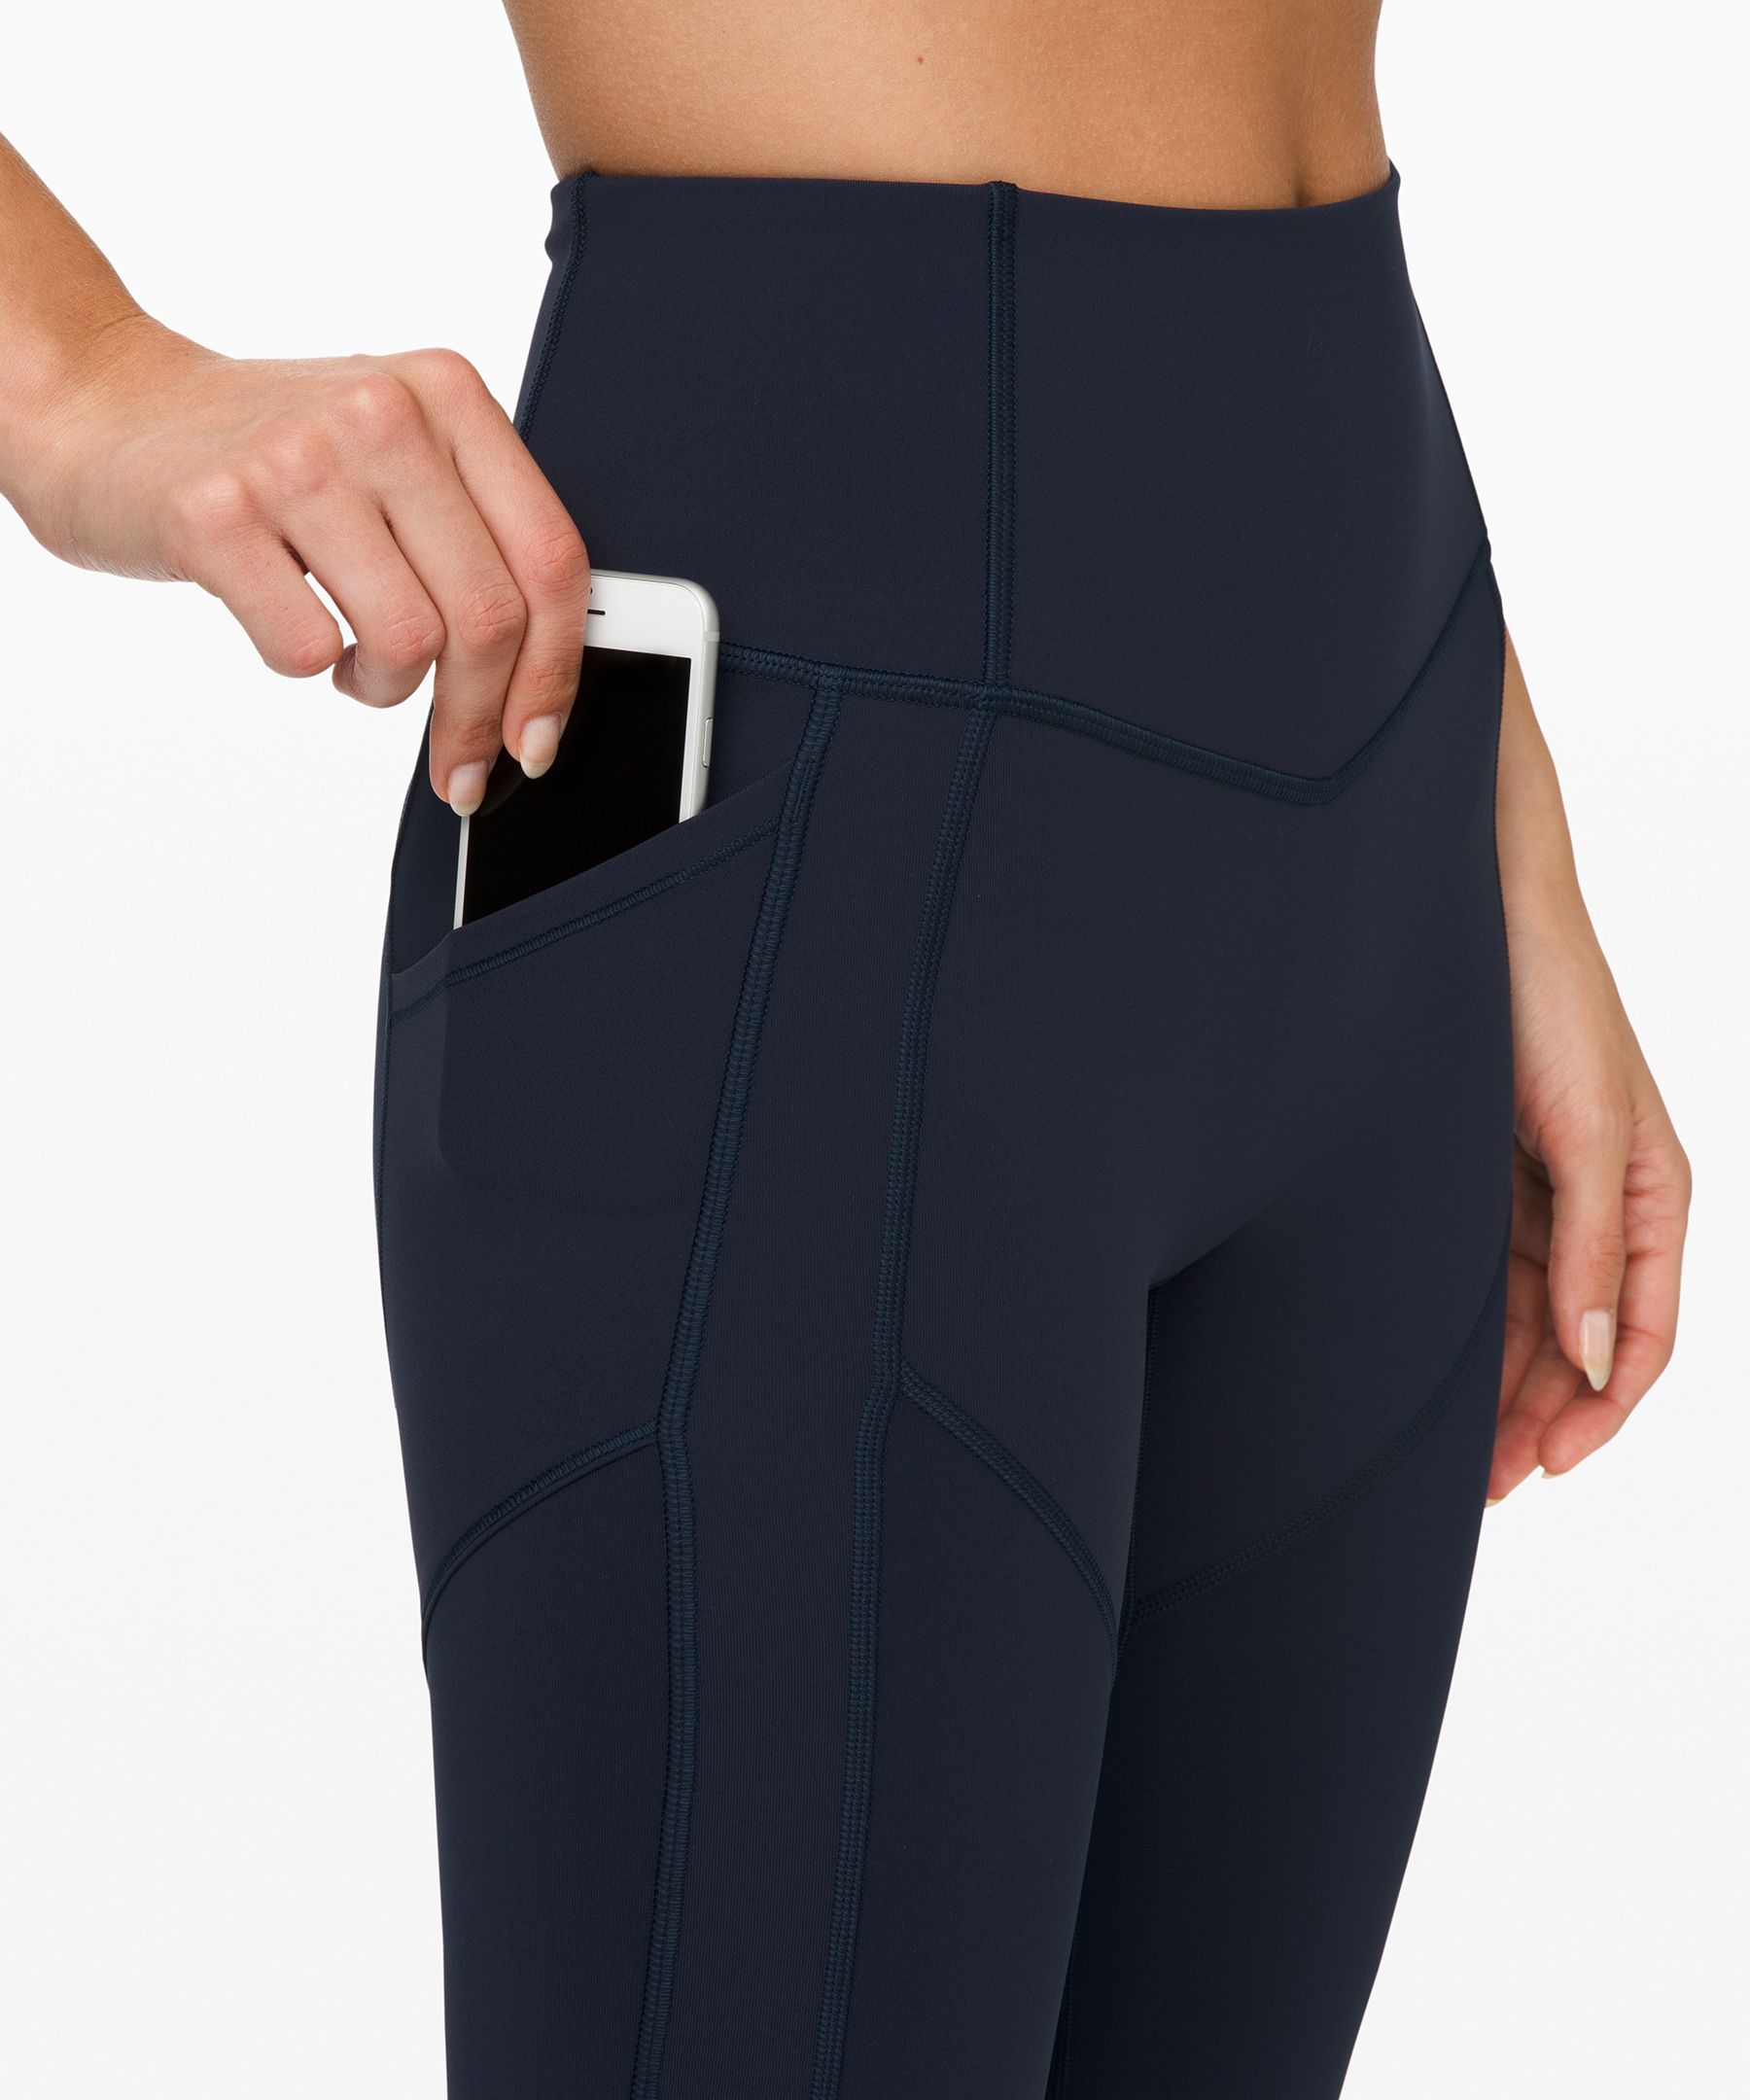 Lululemon All the Right Places, Women's Fashion, Activewear on